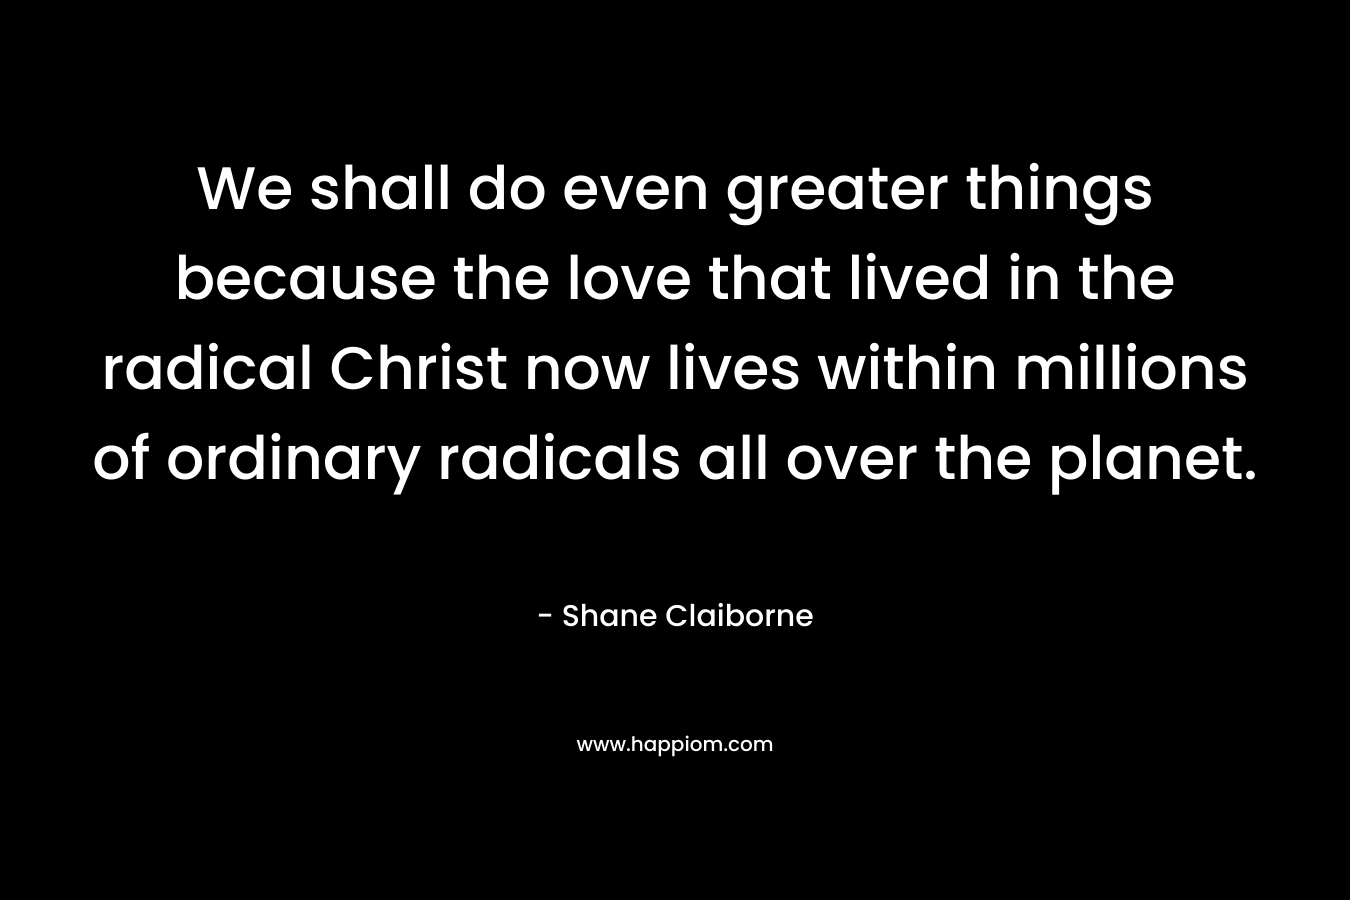 We shall do even greater things because the love that lived in the radical Christ now lives within millions of ordinary radicals all over the planet. – Shane Claiborne